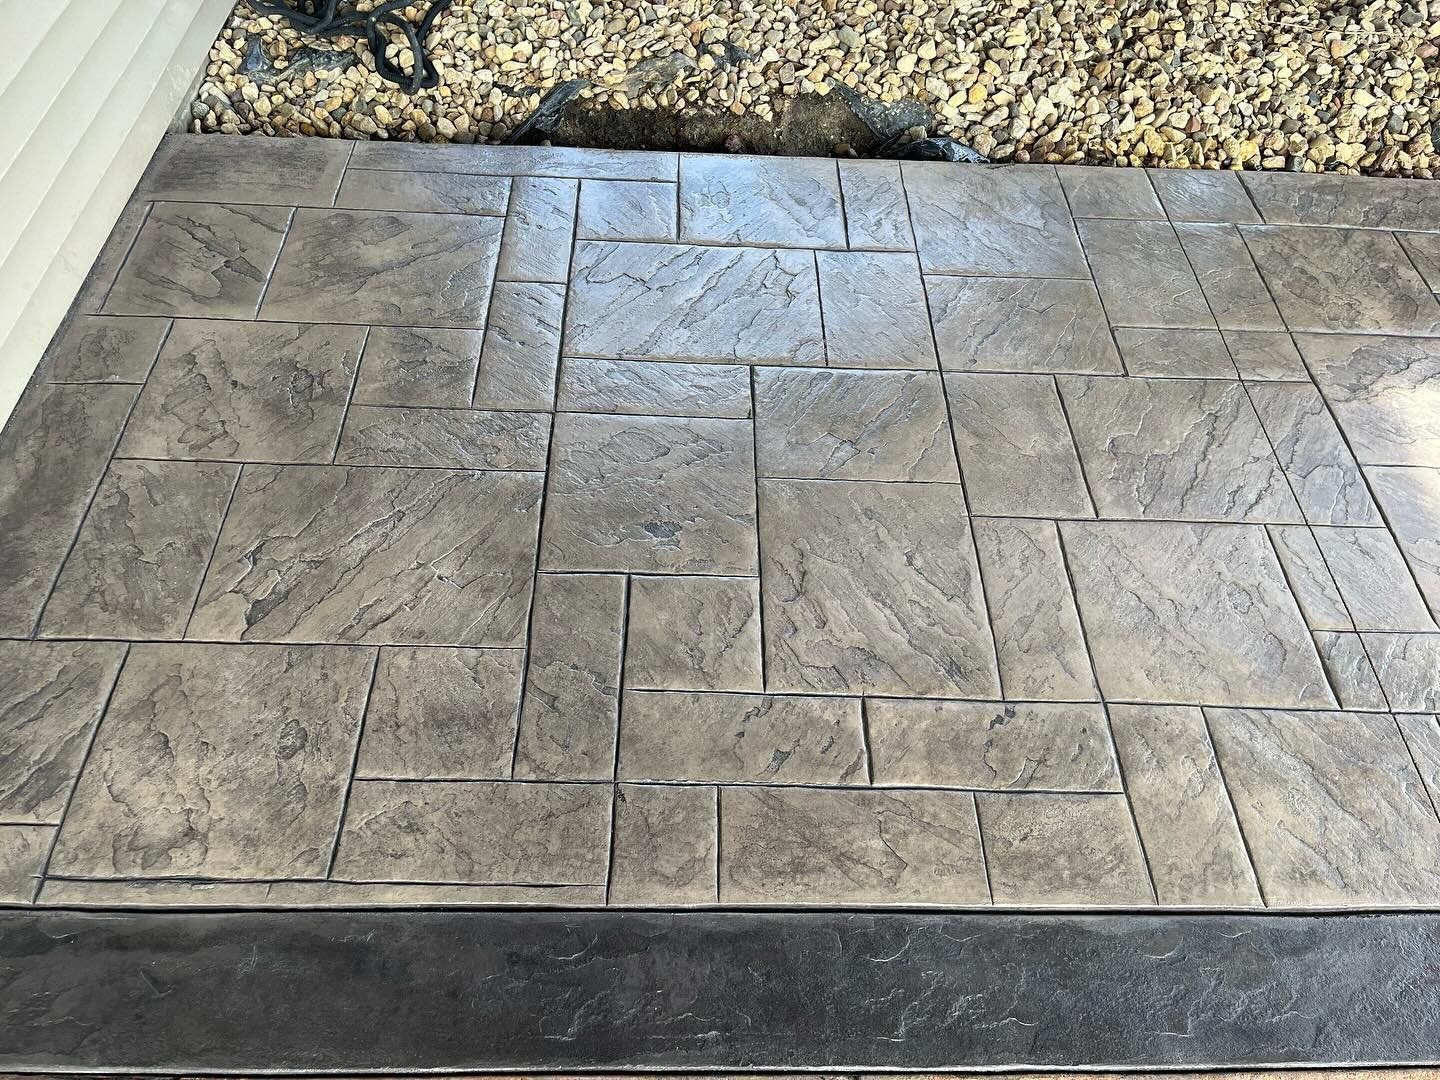 We poured this stamped patio extension with a black band next to an existing orange colored stamped patio. 

@decocrete_supply Smokey brown CH with dark gray RA and the border is dark gray CH with Black RA using La Habra ashlar slate.